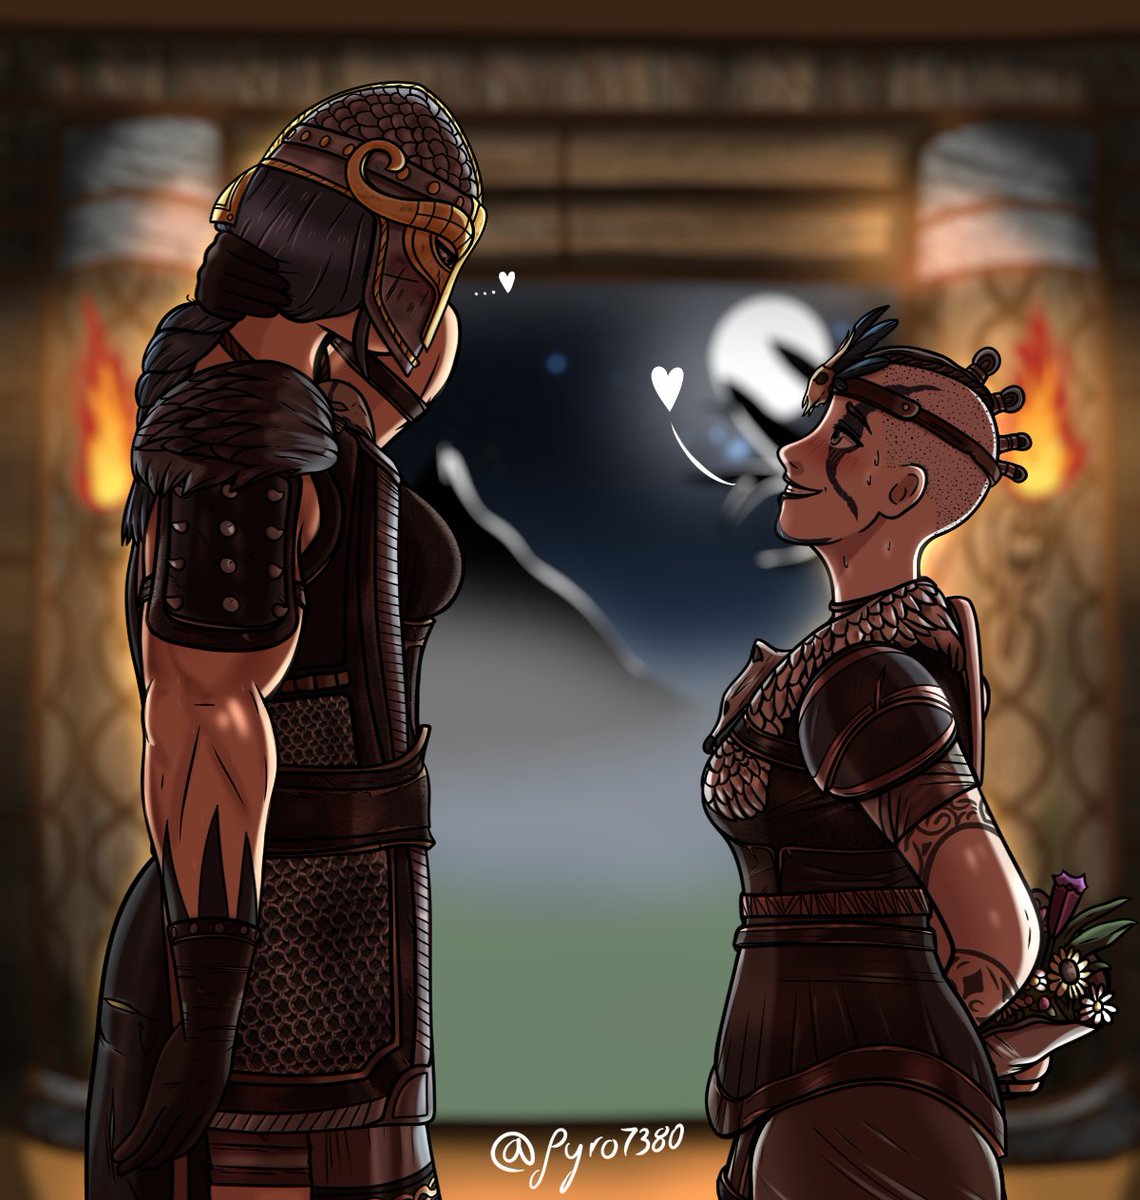 Indsigt fusion Næb Py 🔥 on Twitter: "the girlfriends.. Shaman seems to have a gift for her  Valk 😳 #FHfanart #UbiFanArt https://t.co/qAga2njF8M" / Twitter